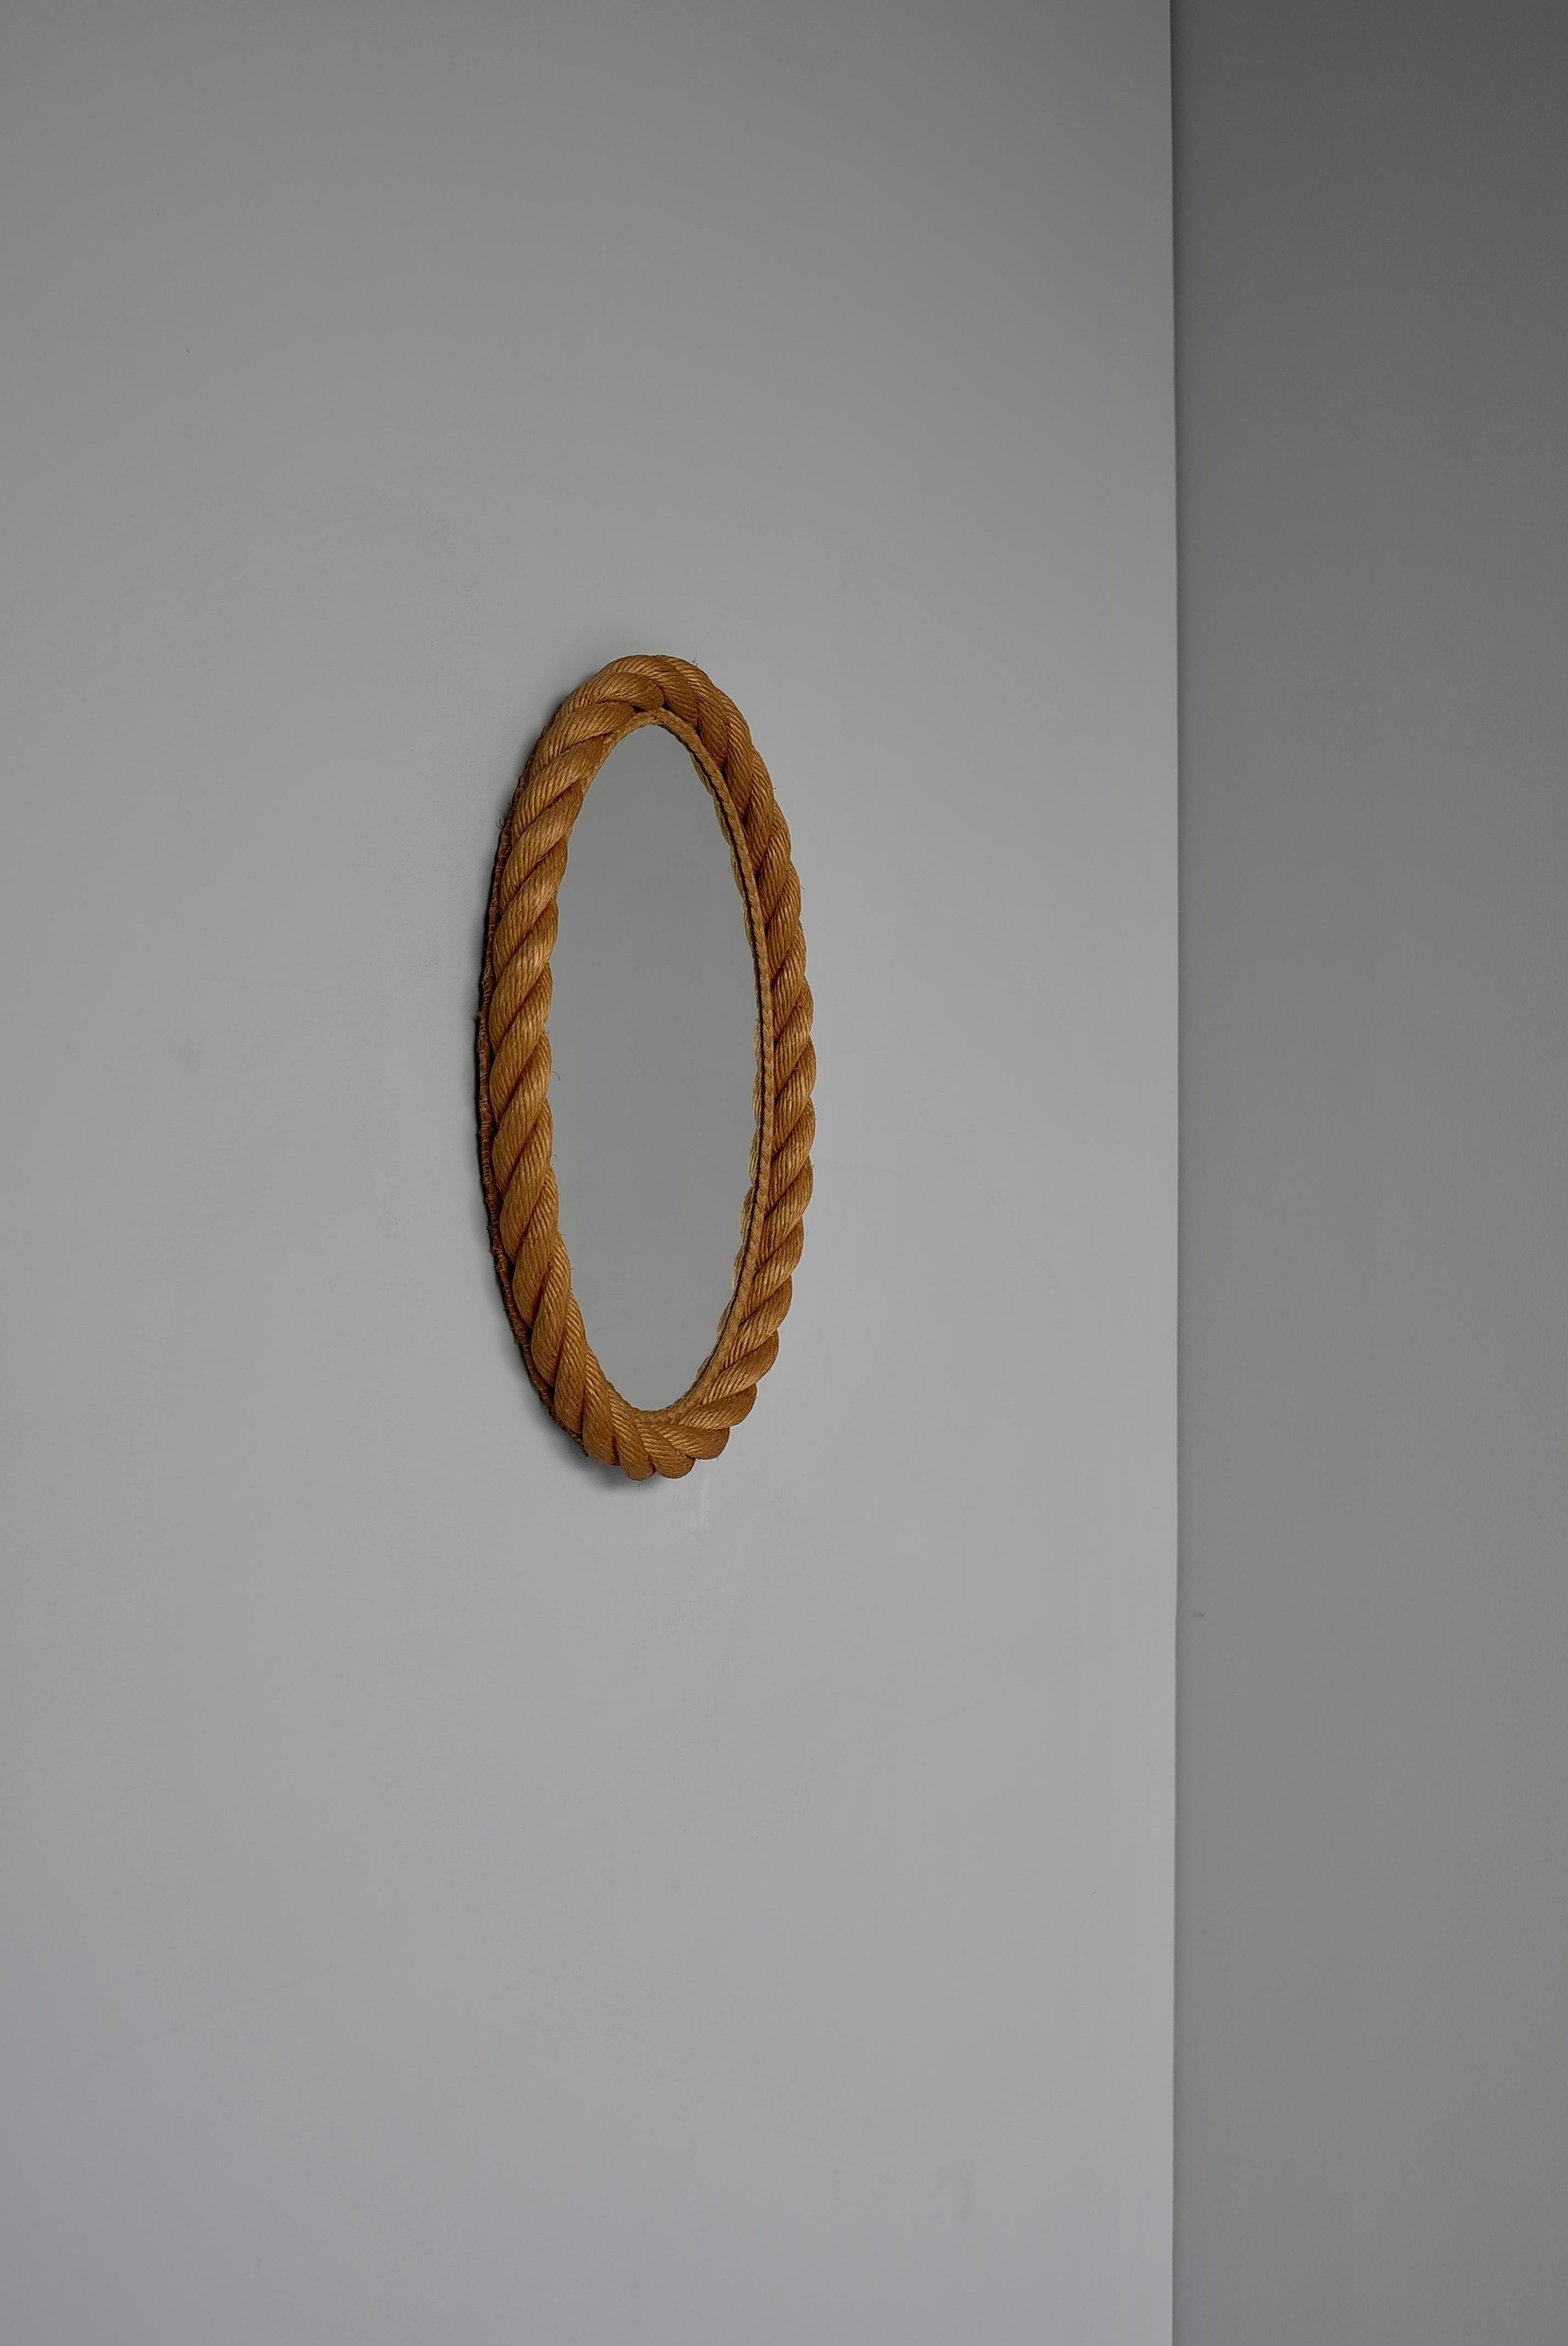 20th Century Oval Rope Mirror by Adrien Audoux and Frida Minet, France, 1950s For Sale